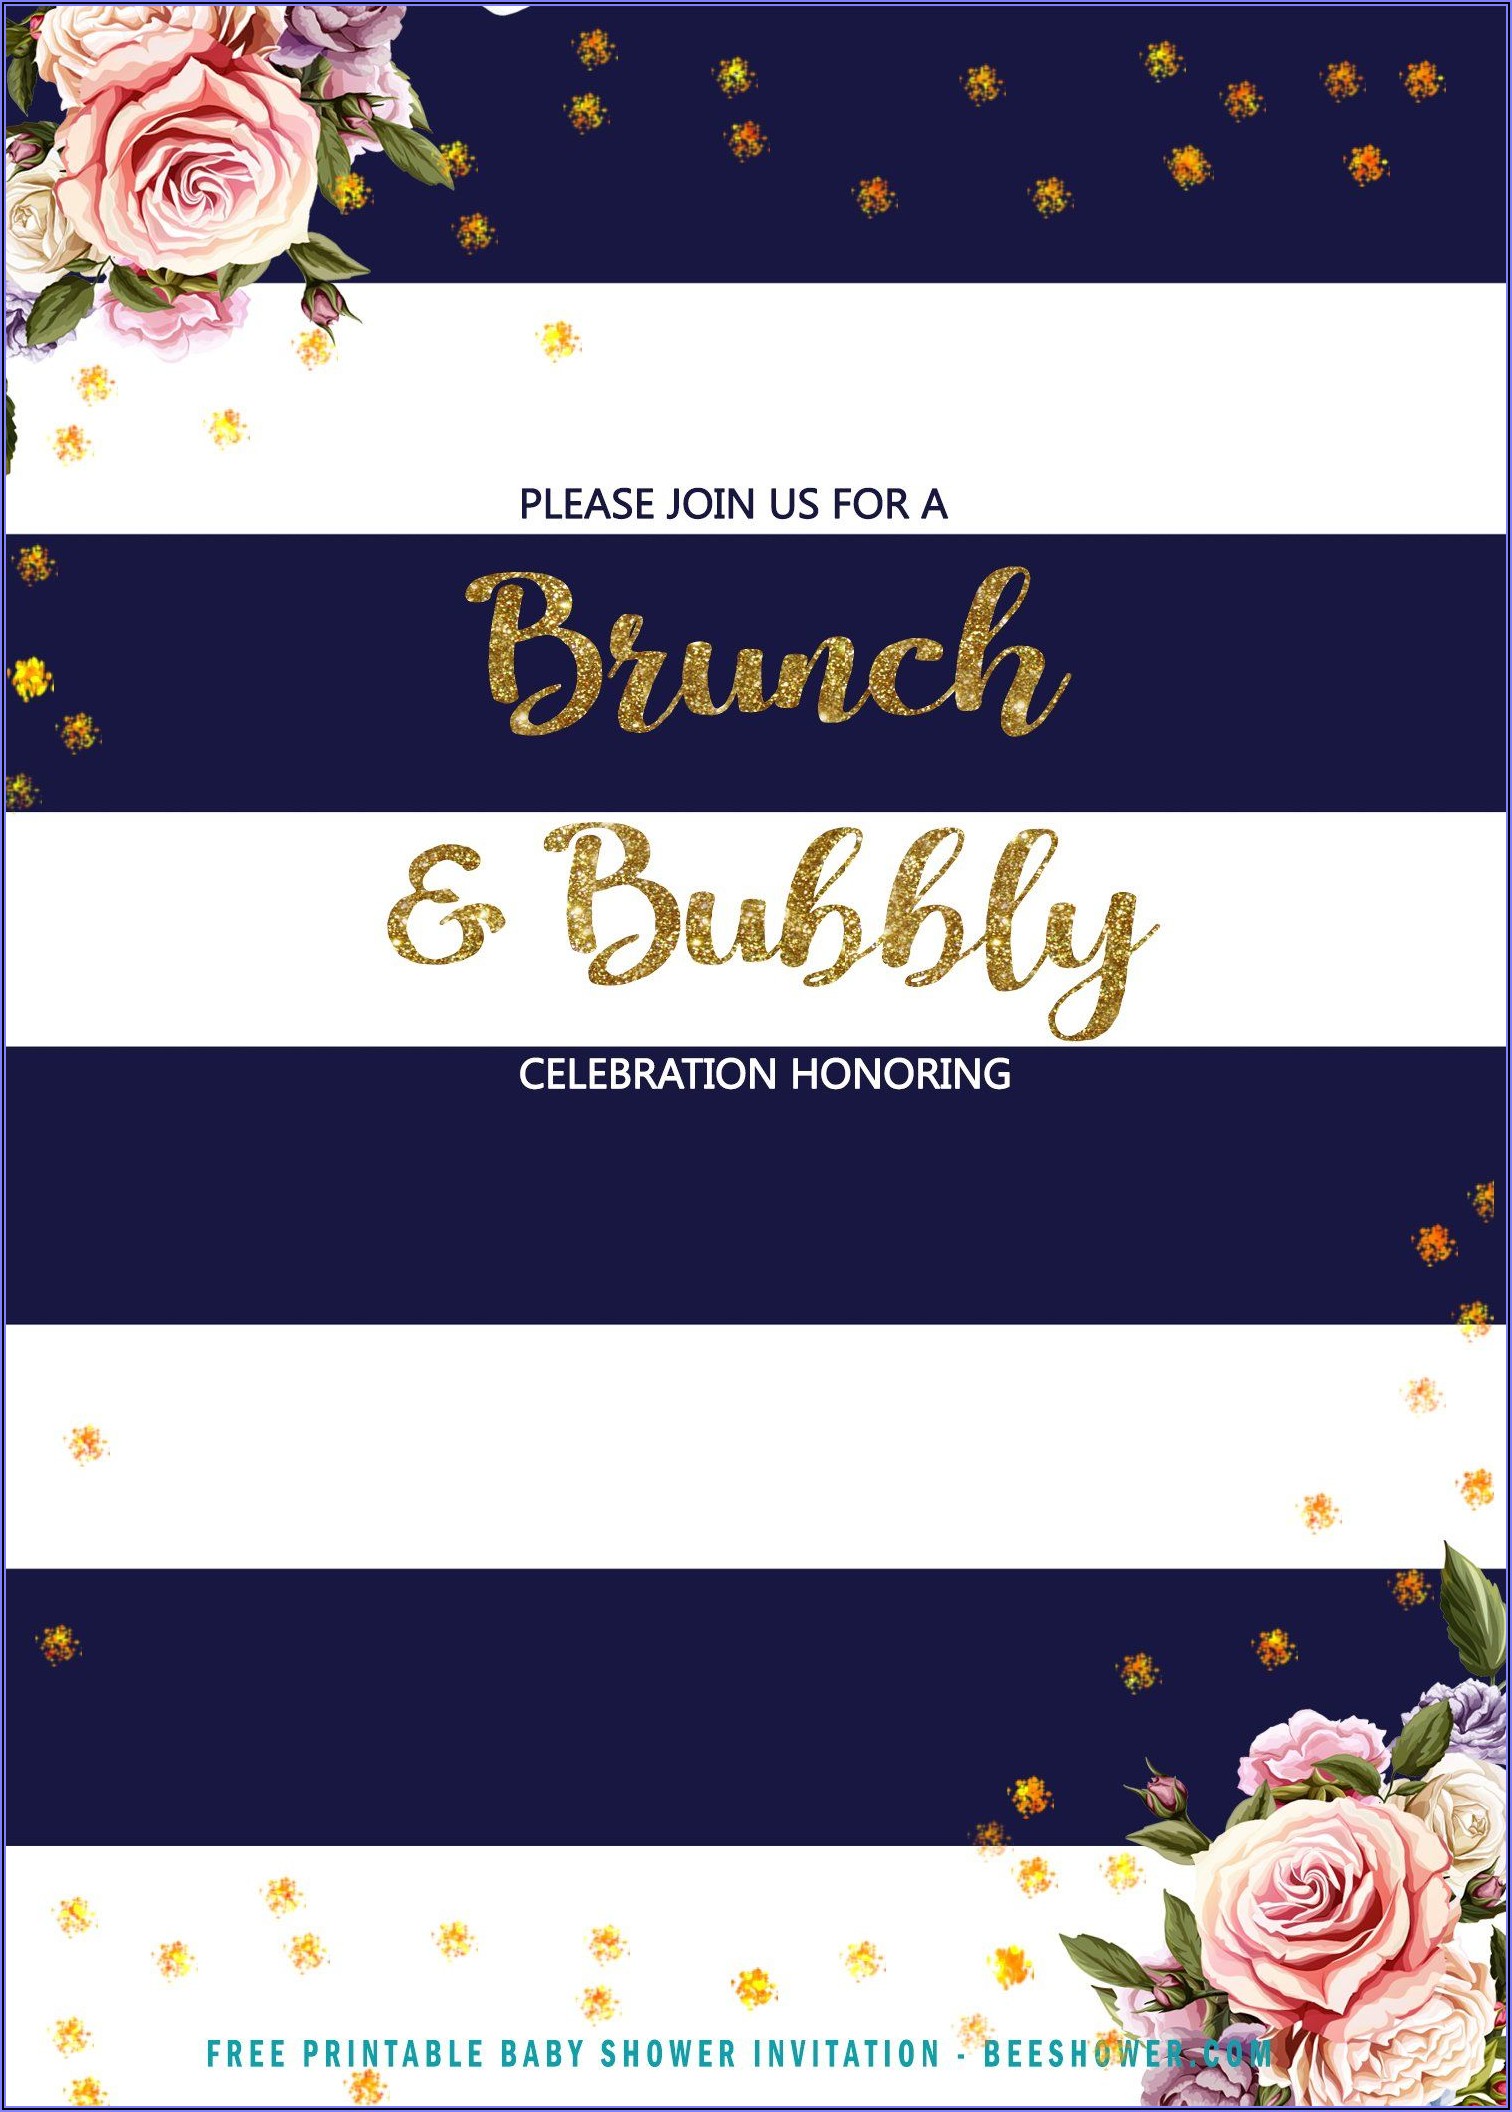 Brunch And Bubbly Birthday Invitations